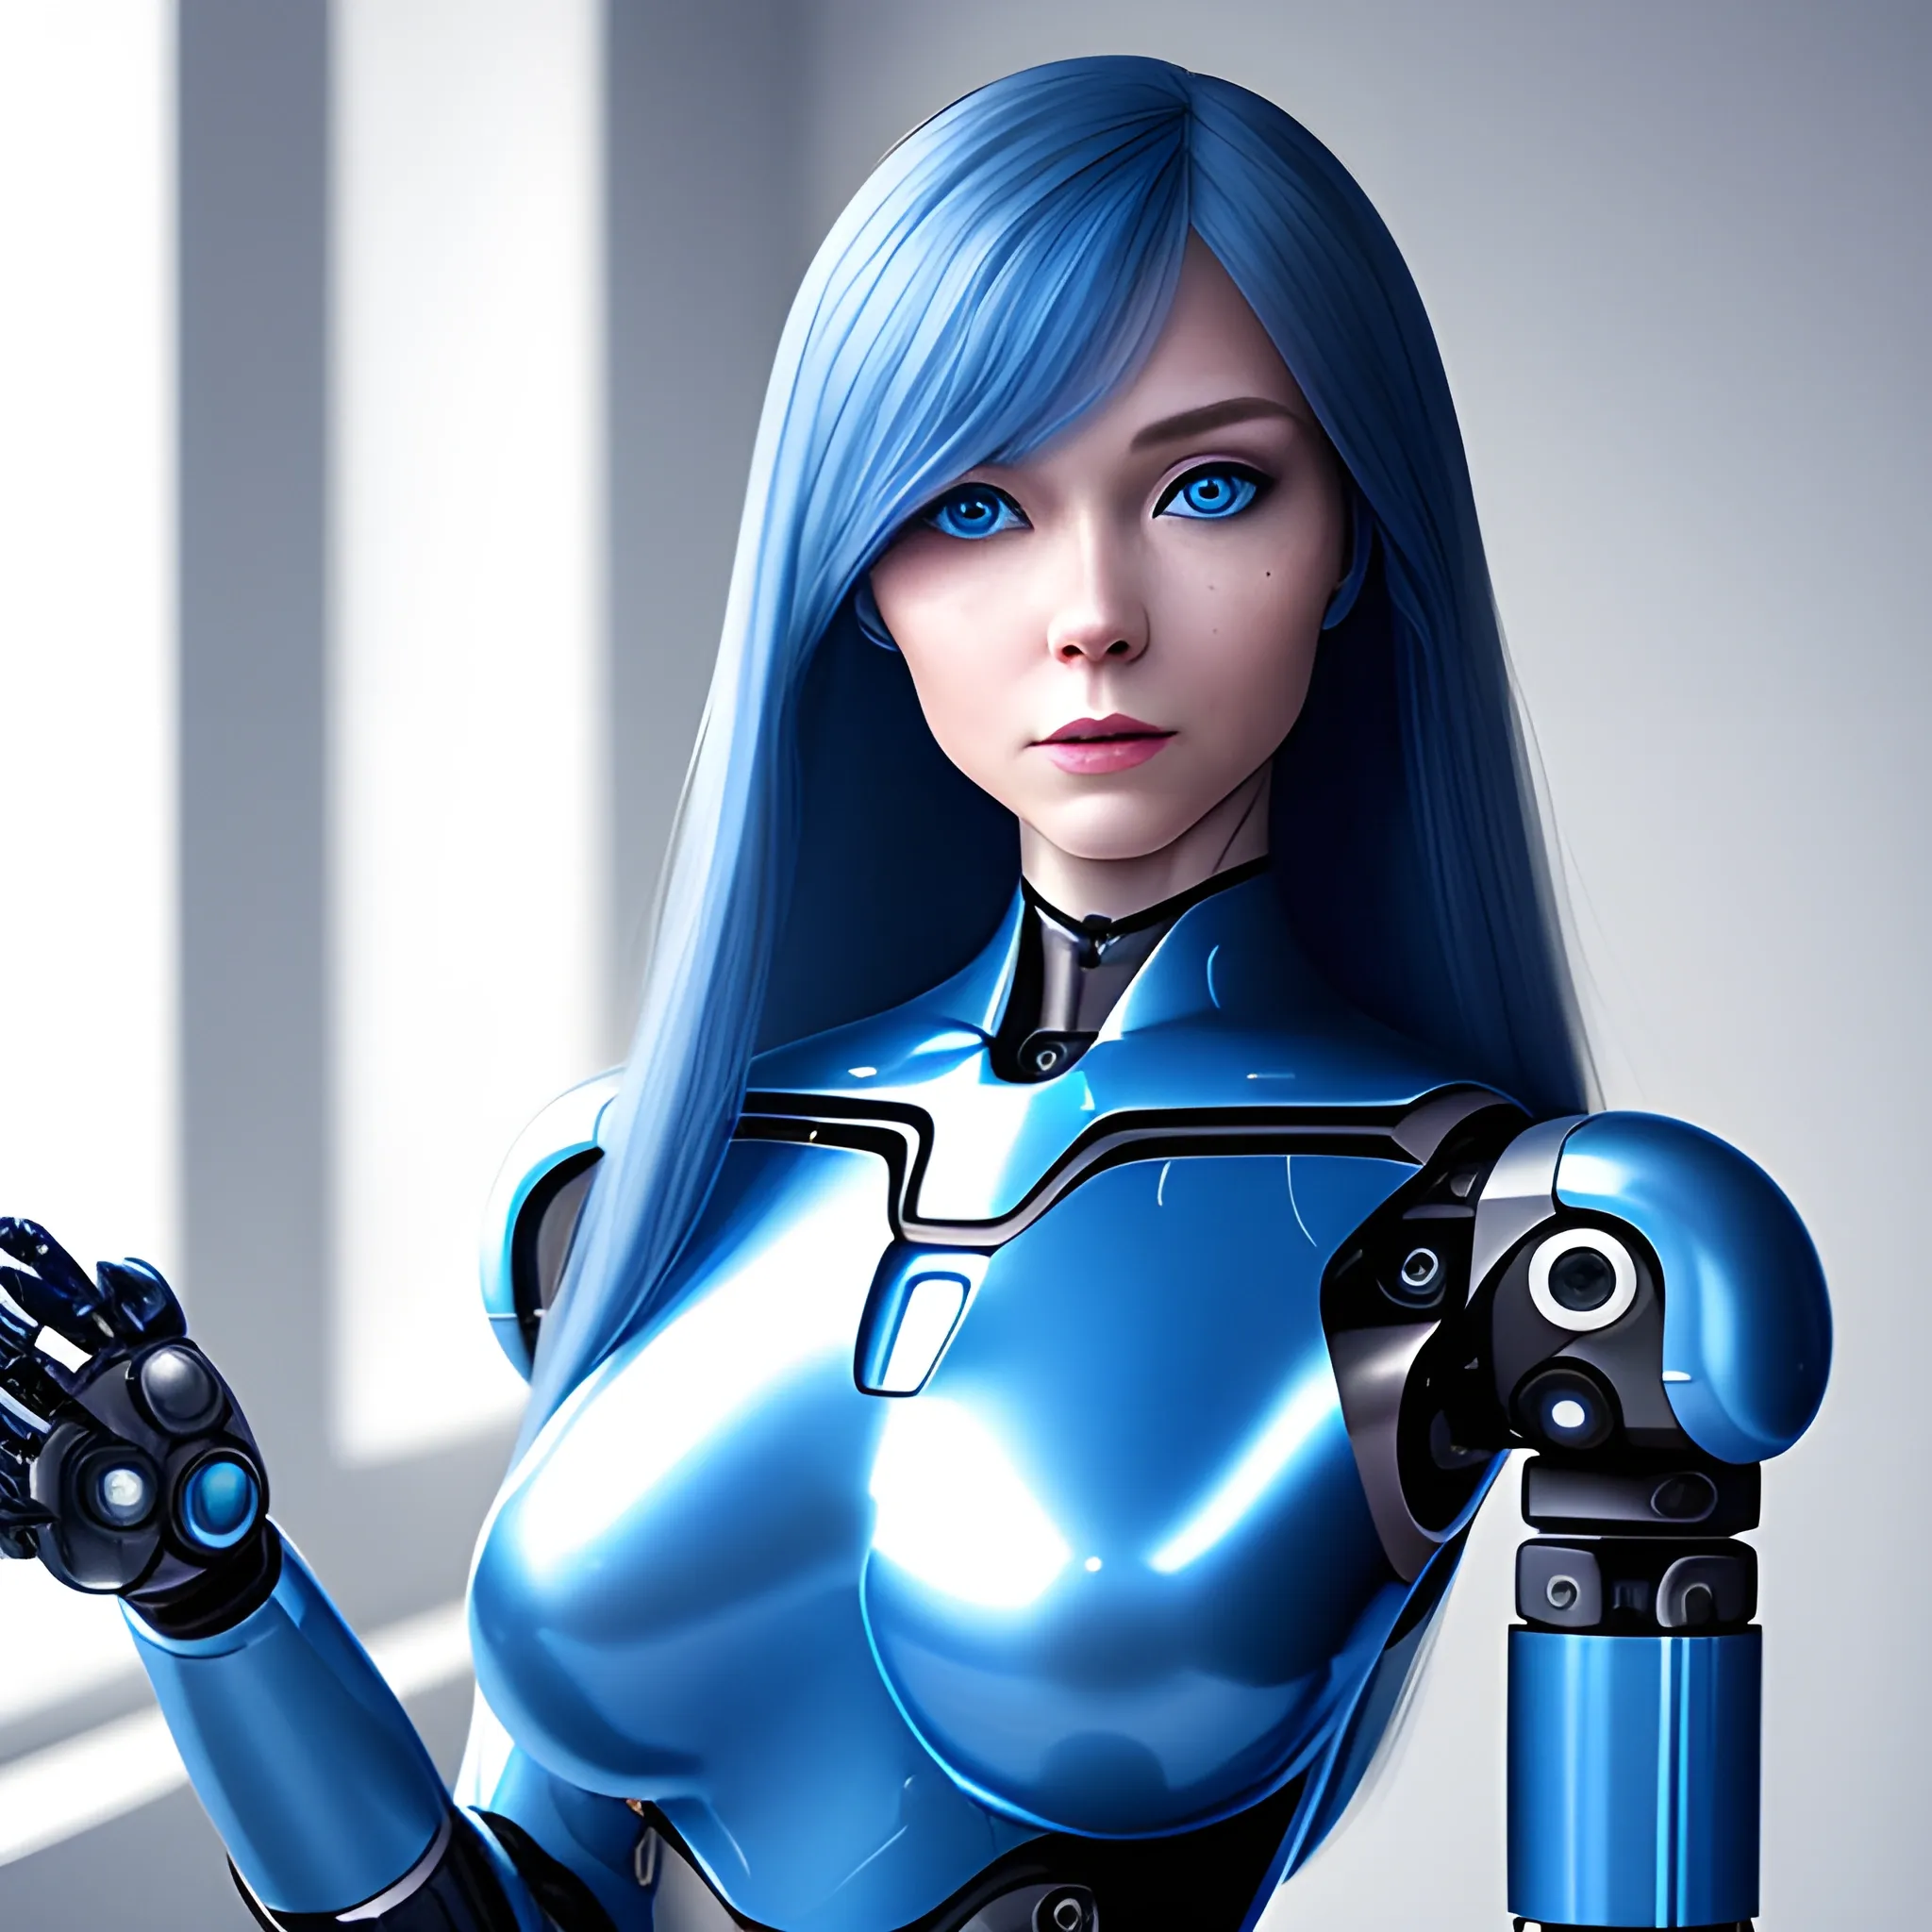 a human type female robot with sexy wardrobe, human face, long read hair, blue eyes with speckles
